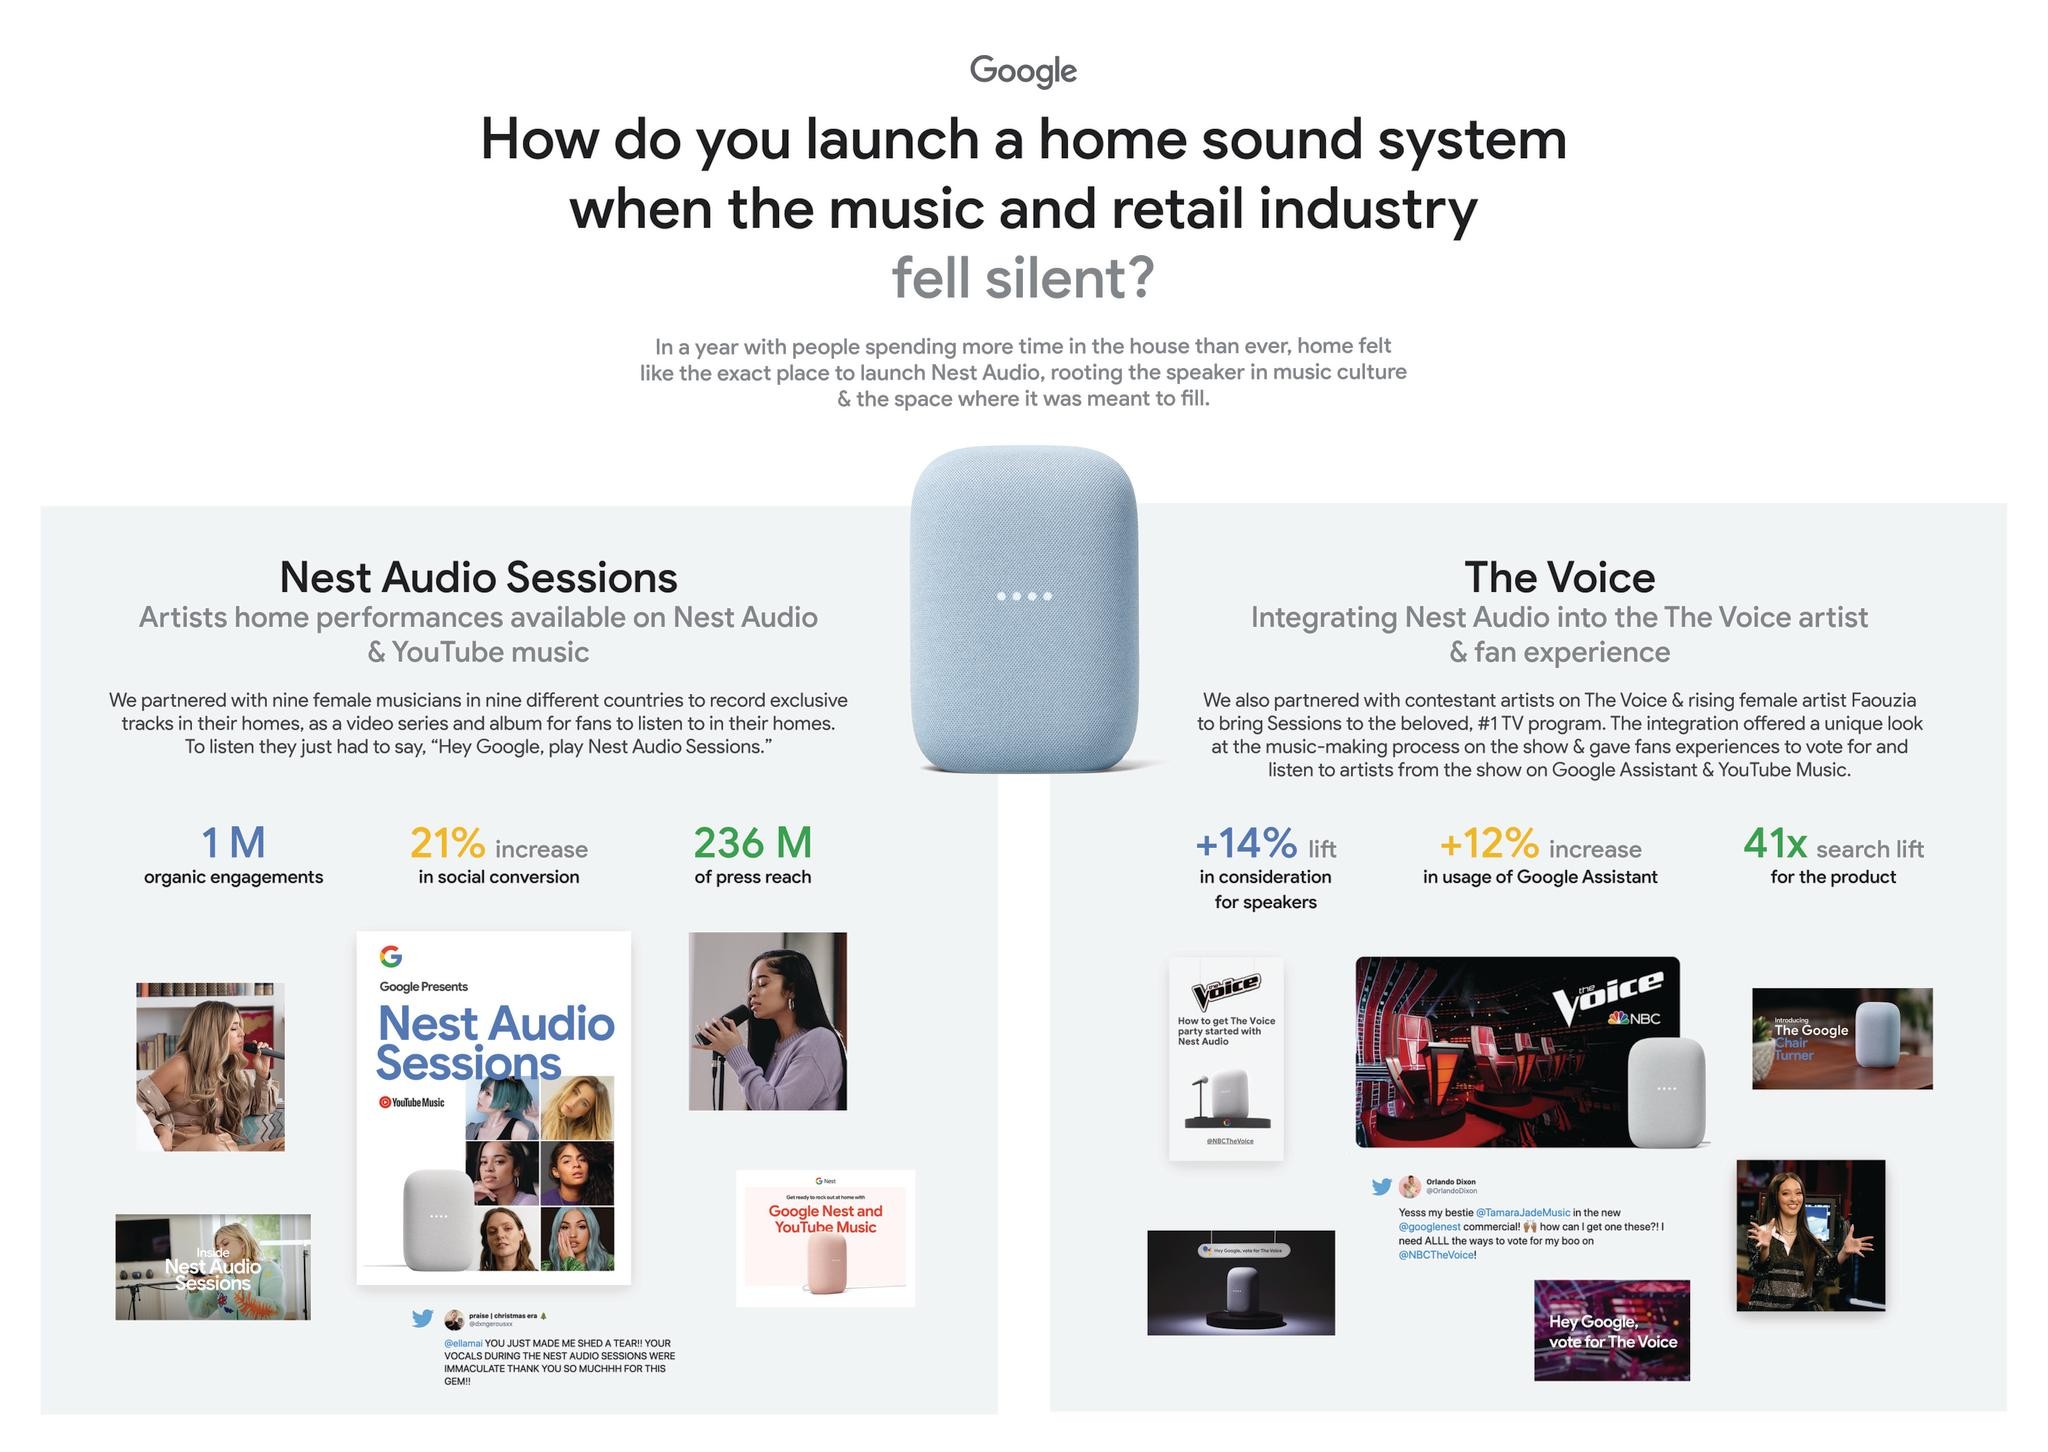 Hey Google Turn It Up: Google Nest Audio Sessions and The Voice